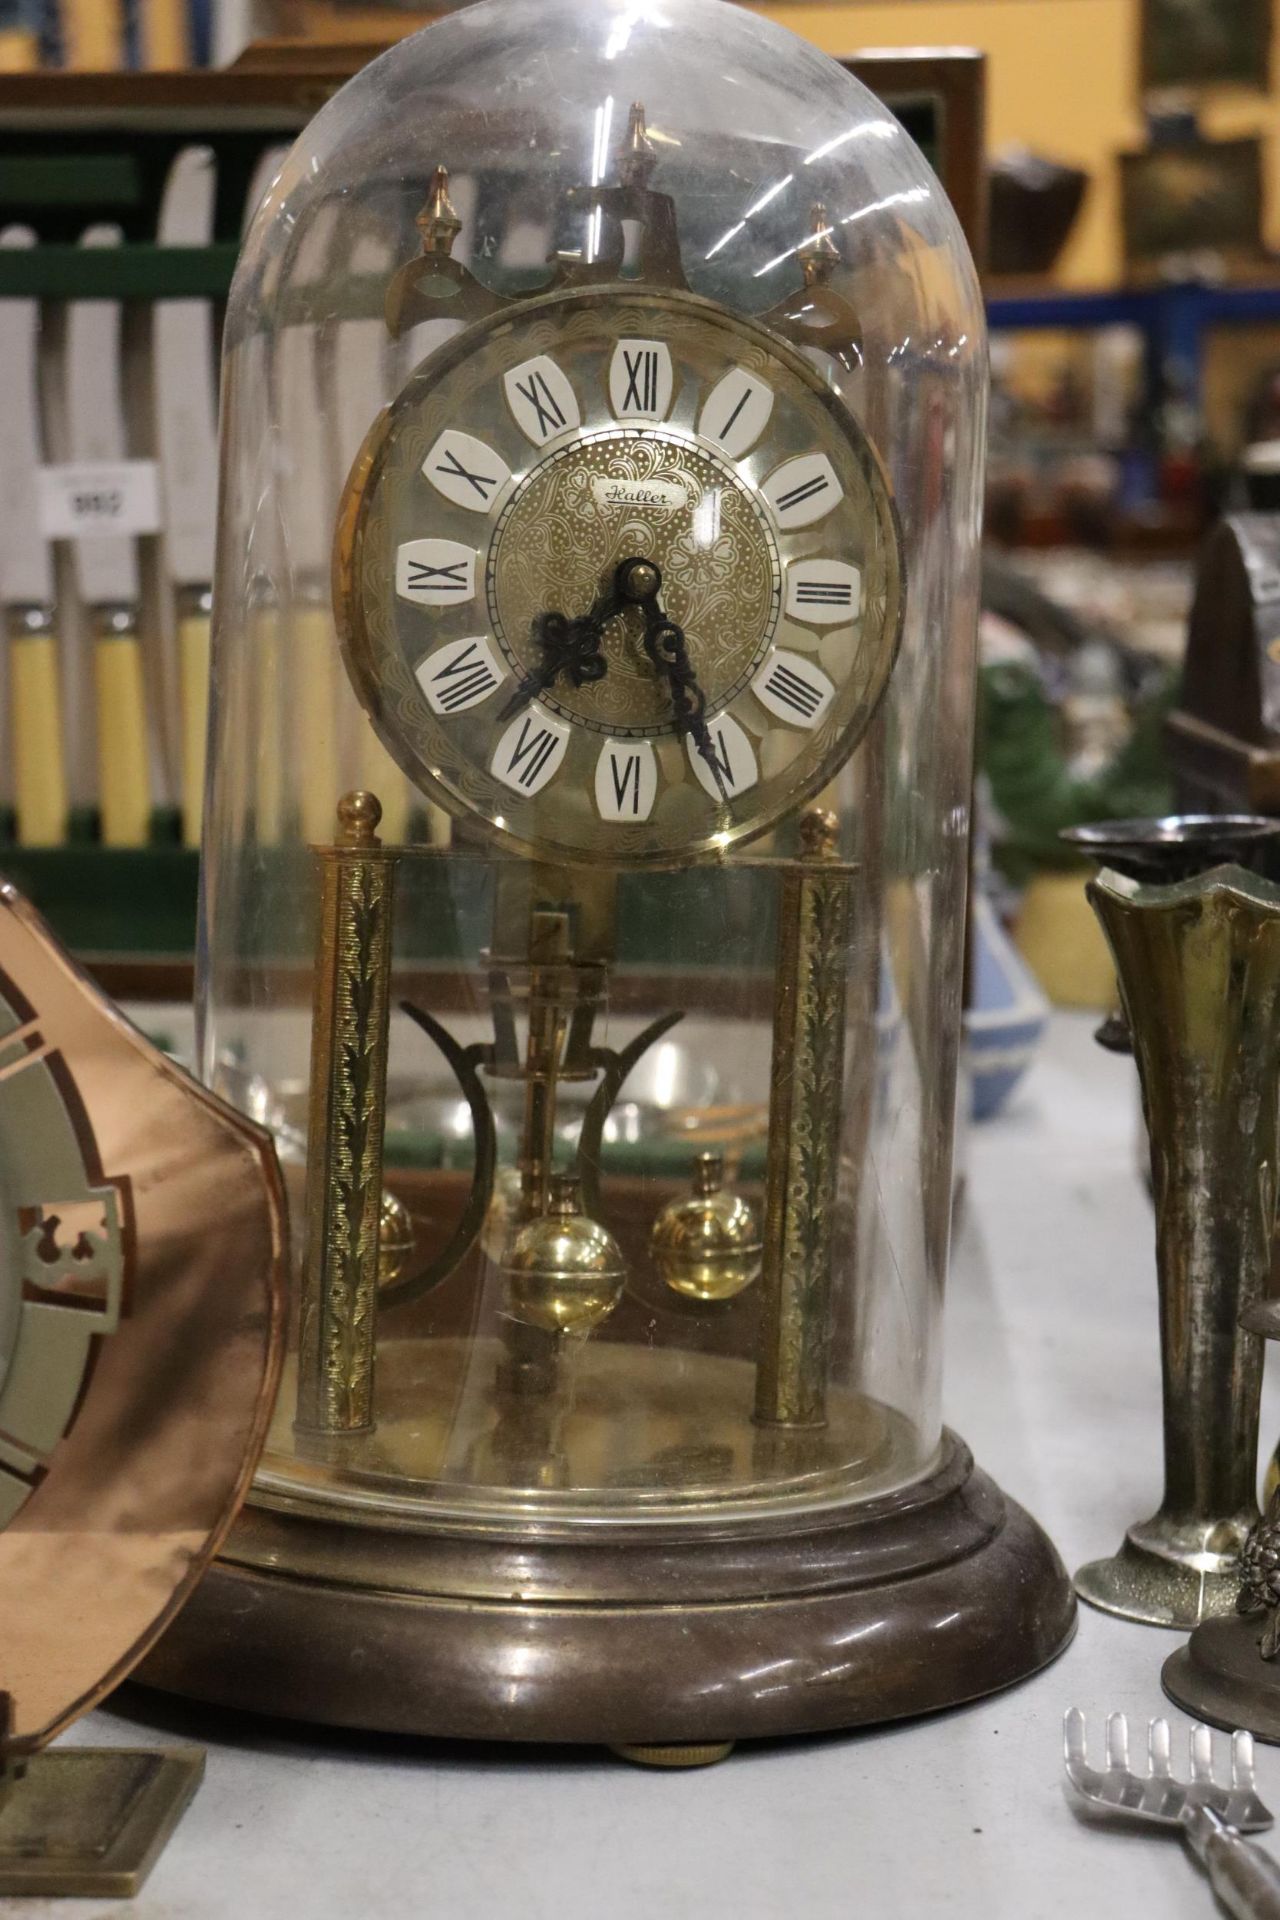 TWO VINTAGE ANNIVERSARY CLOCKS IN DOMES PLUS A MANTLE CLOCK - Image 3 of 12